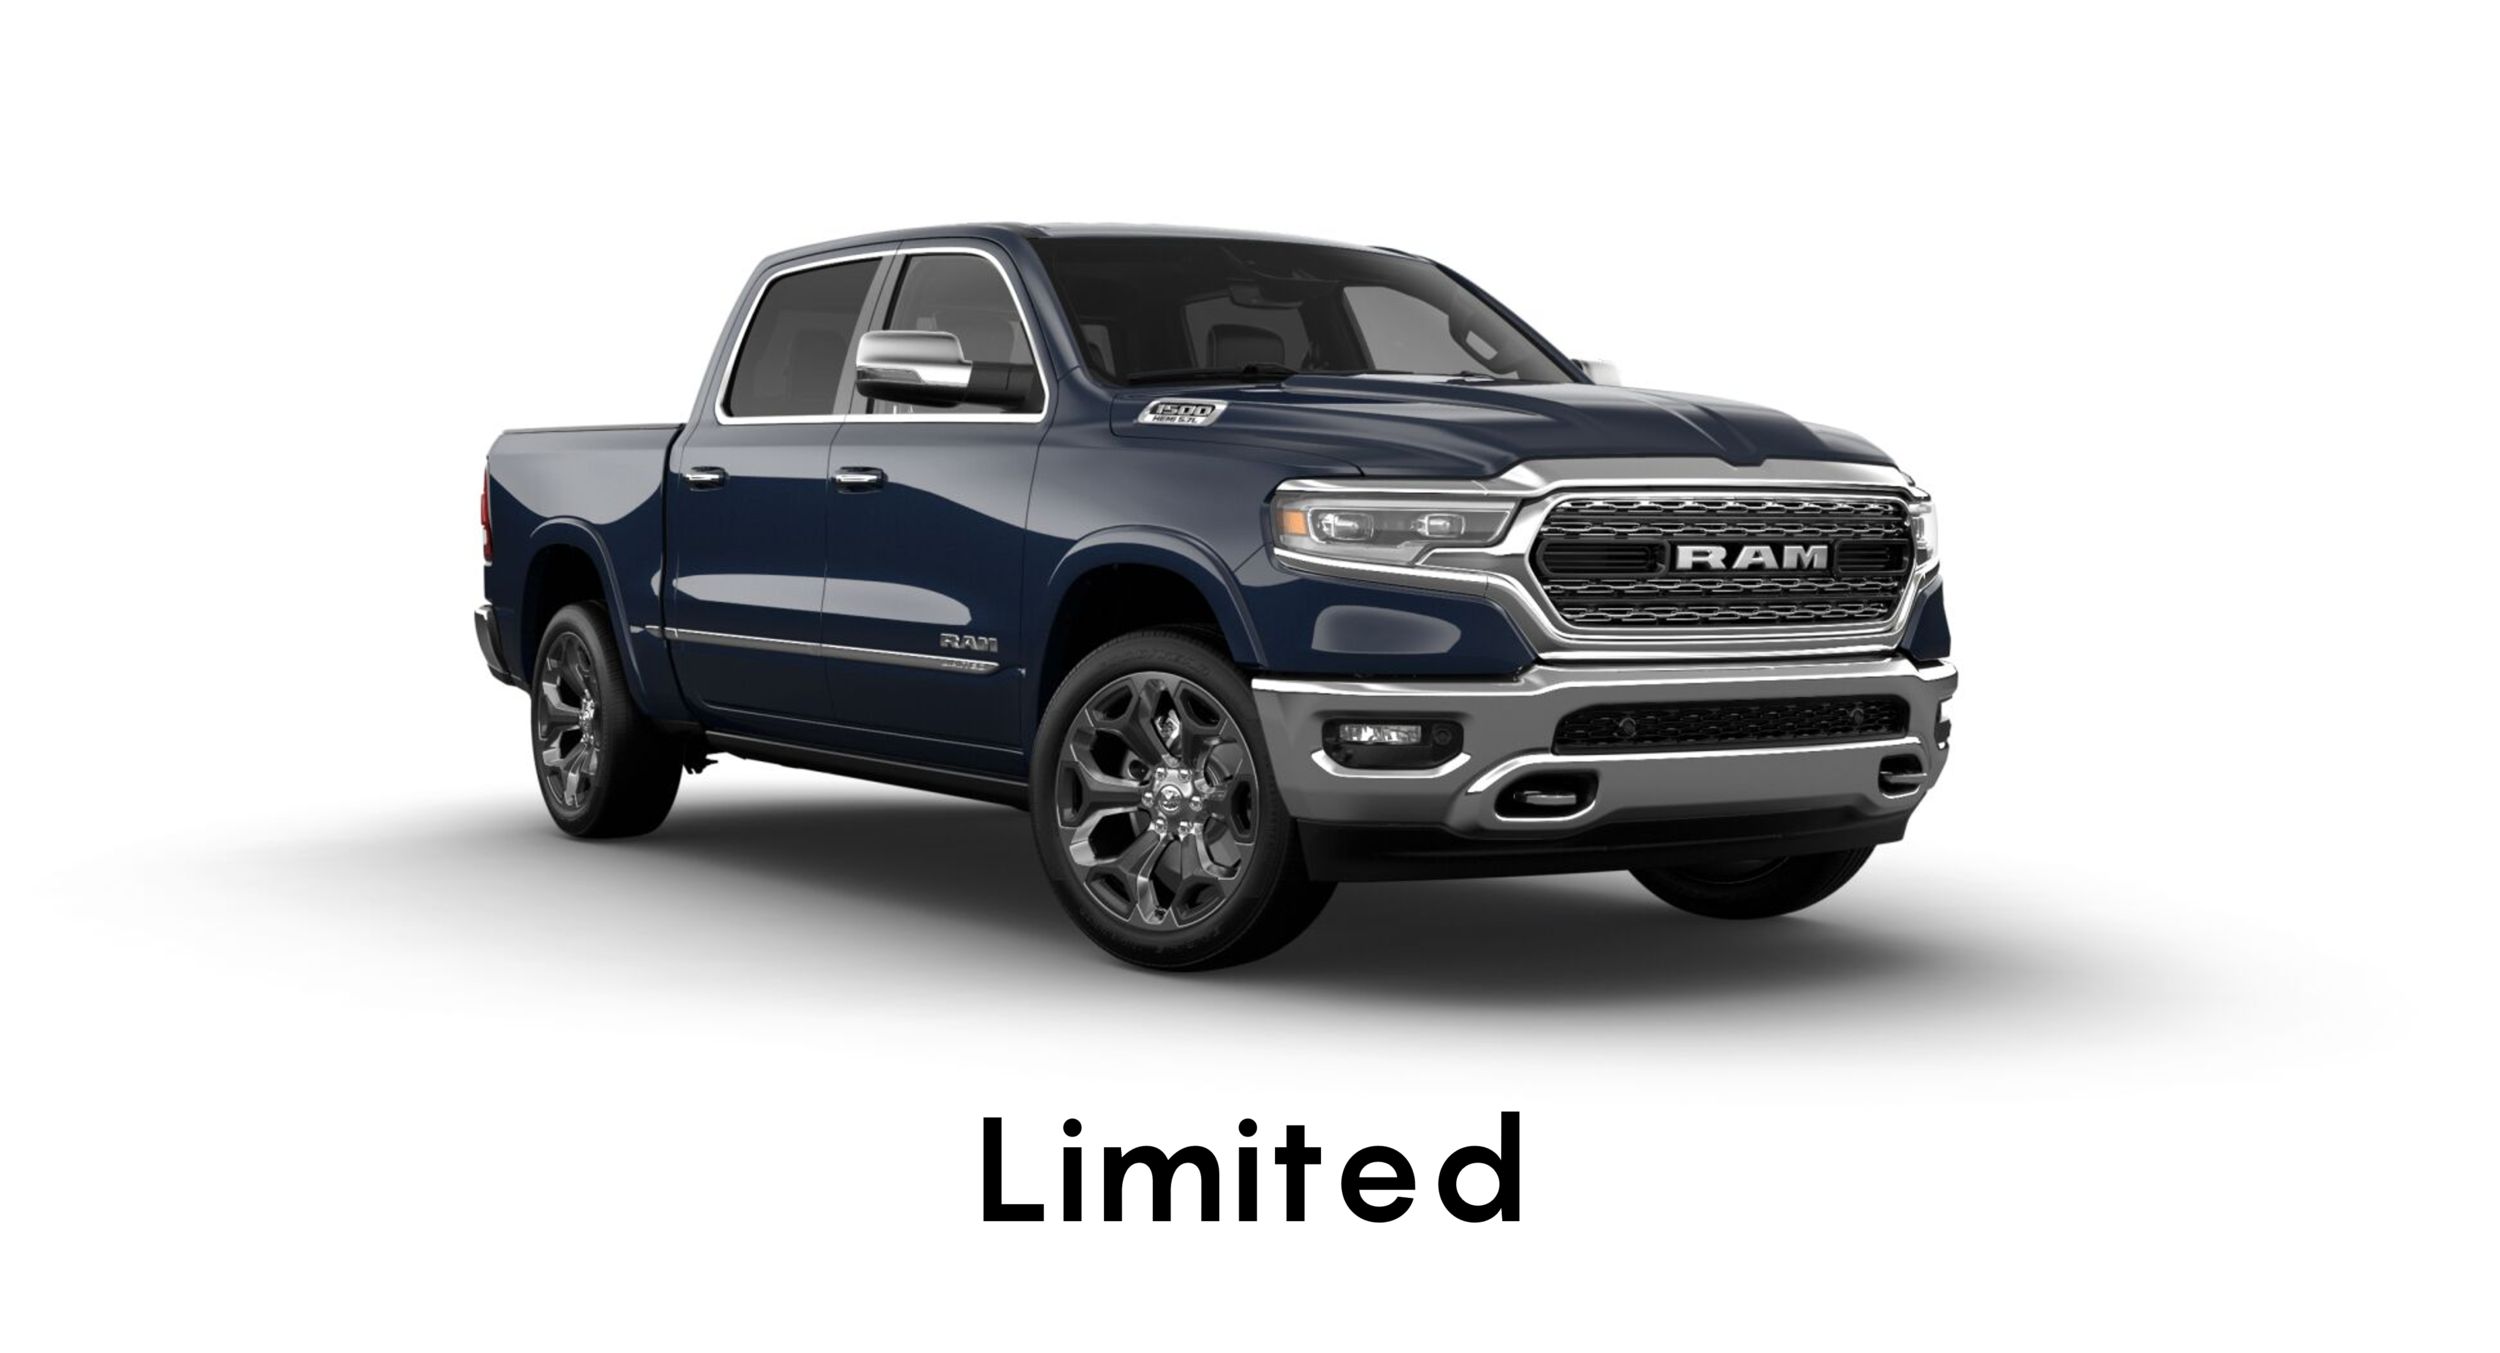 2019+ DT Ram 1500 Limited Text.png